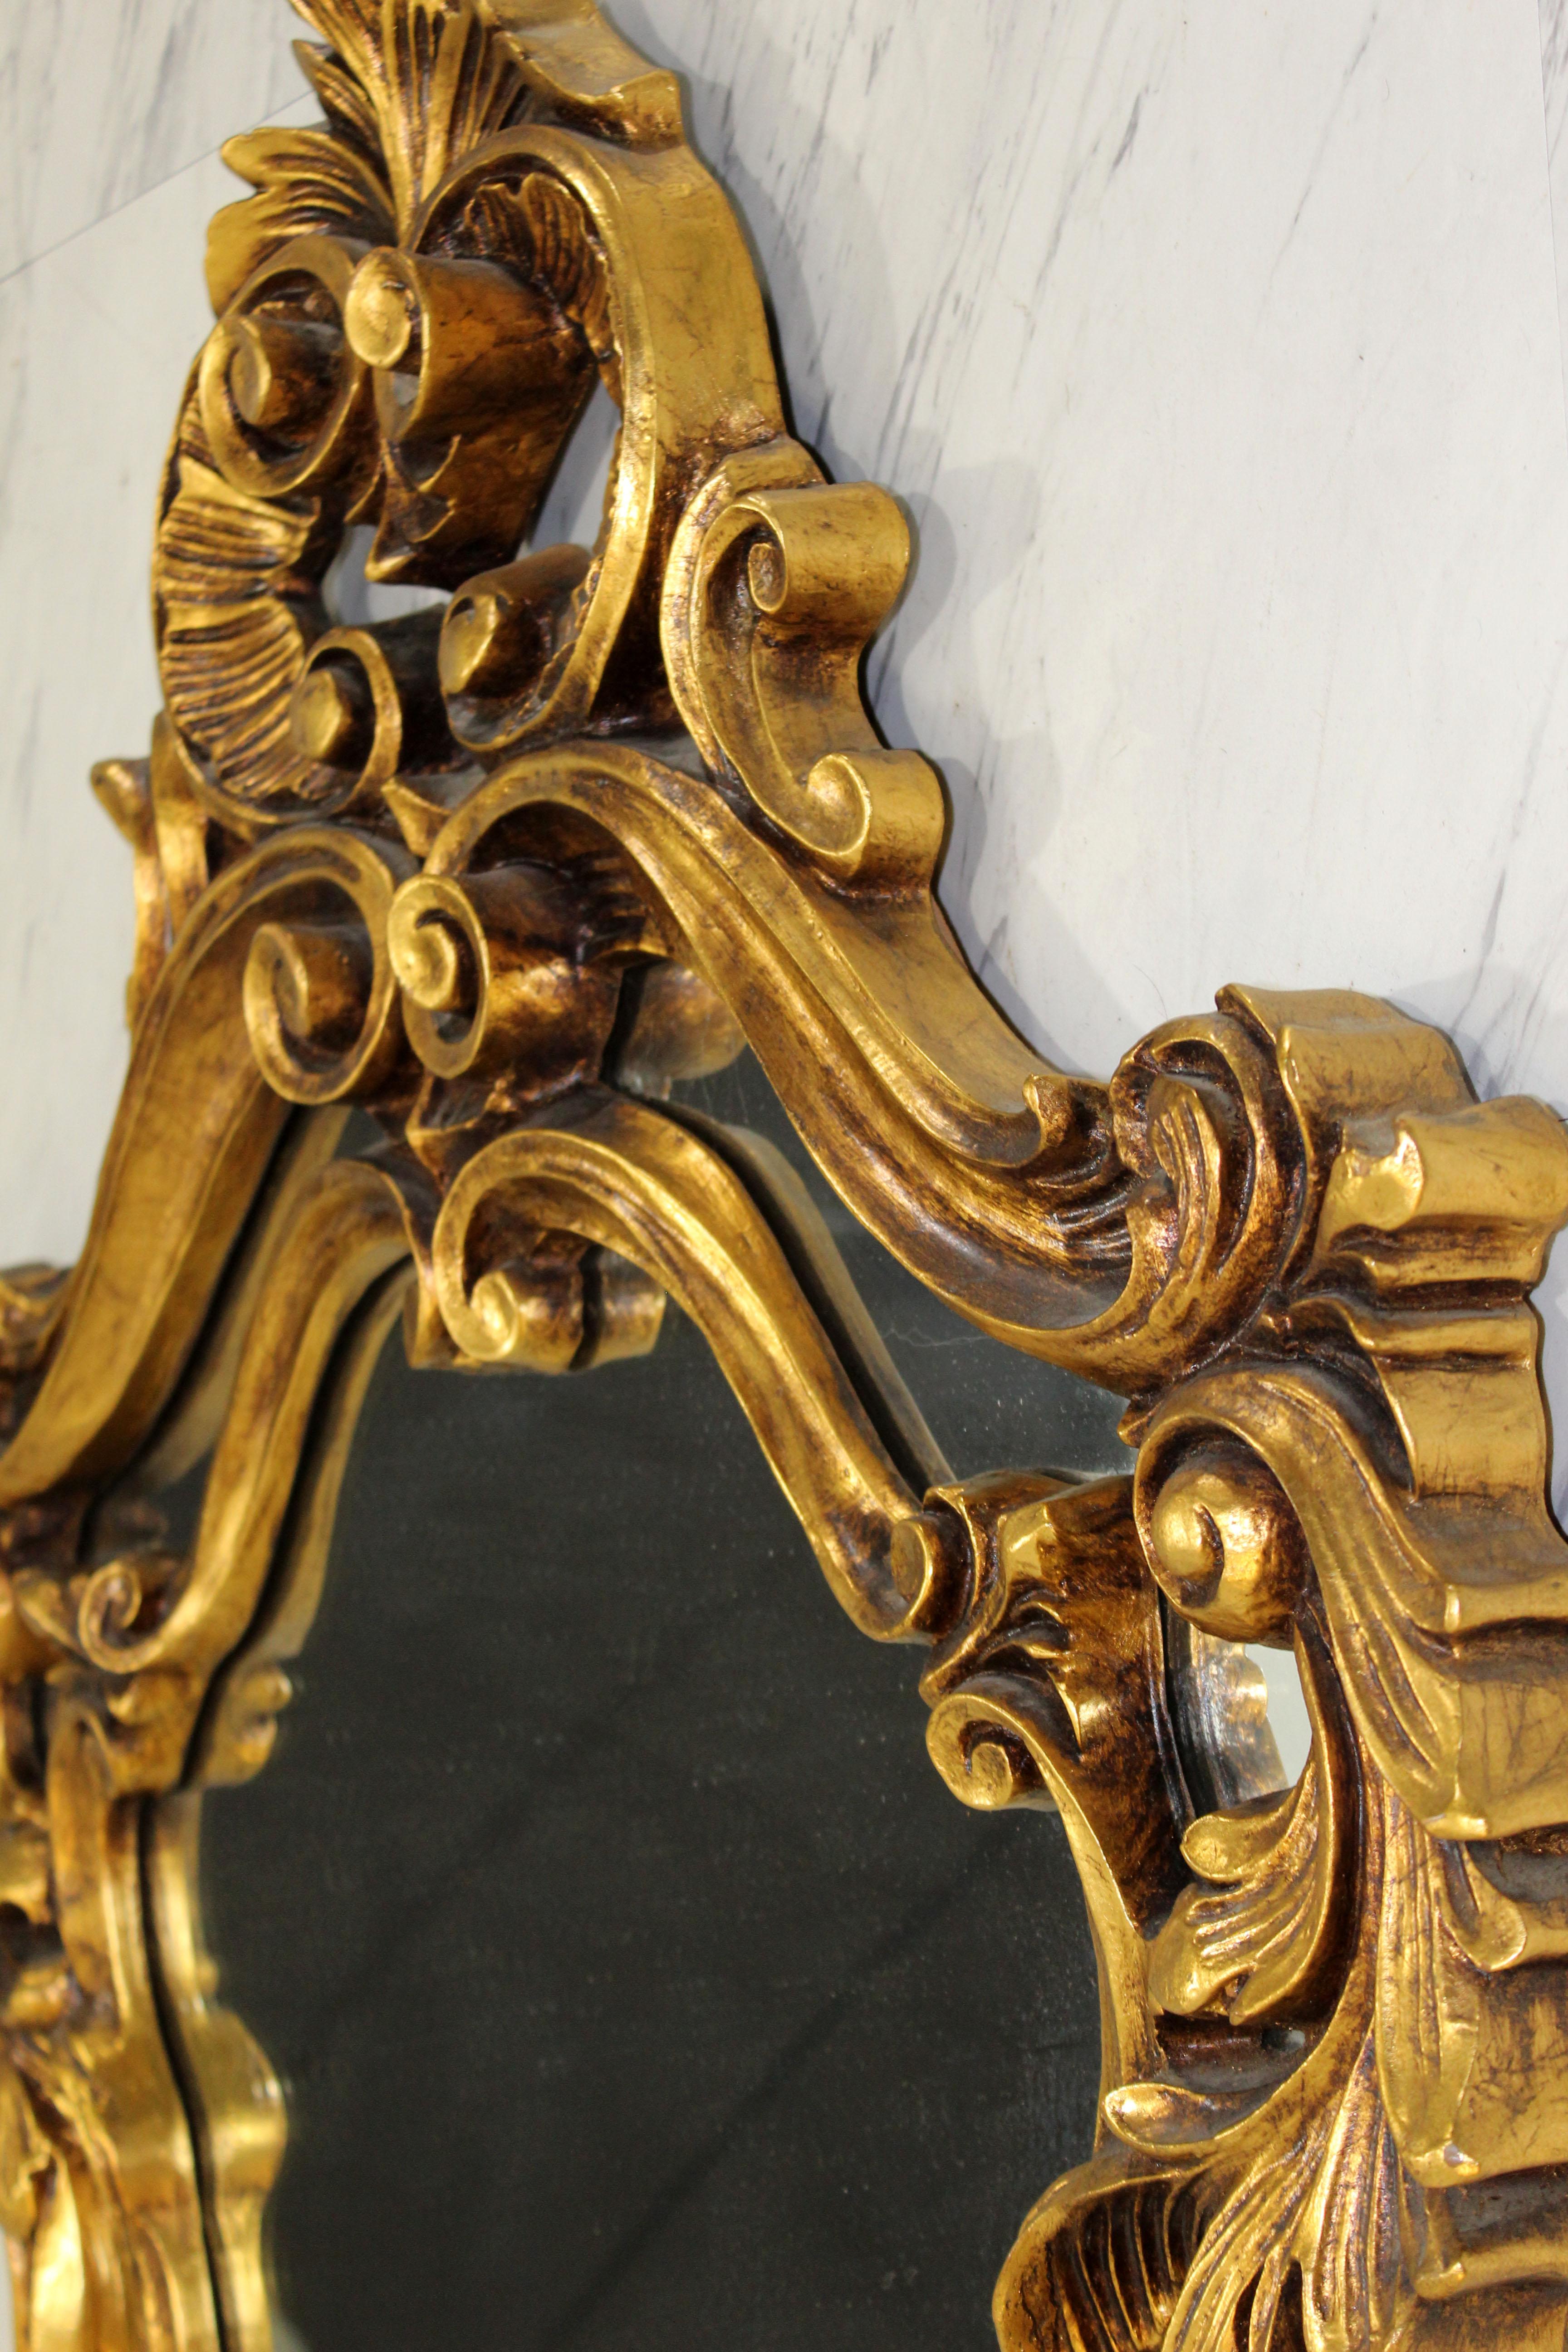 20th Century Pair of Rococo Hollywood Regency Style Gold Gilt Leaf Hanging Wall Mirrors